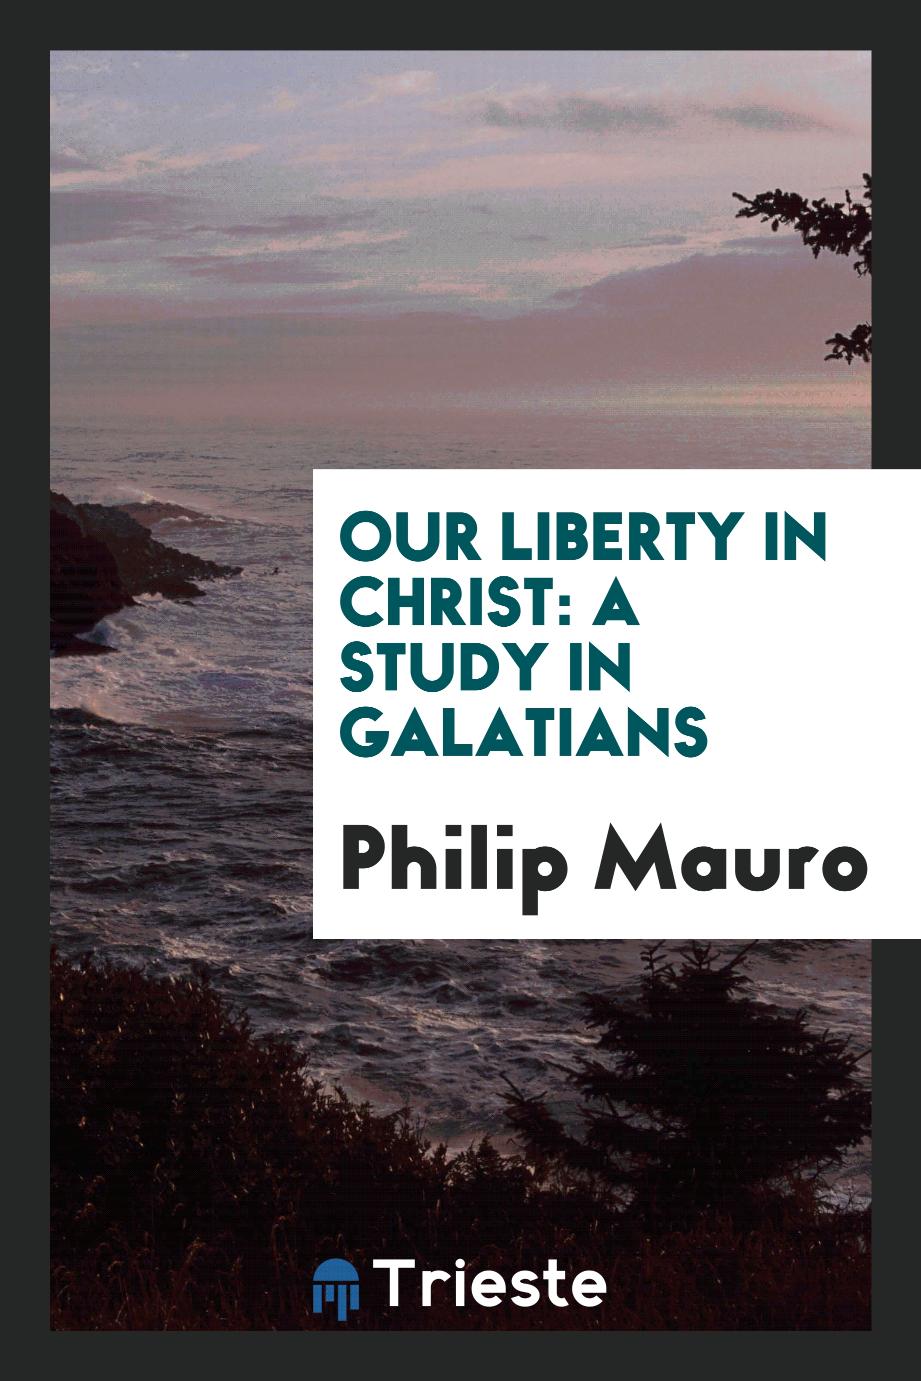 Our liberty in Christ: a study in Galatians